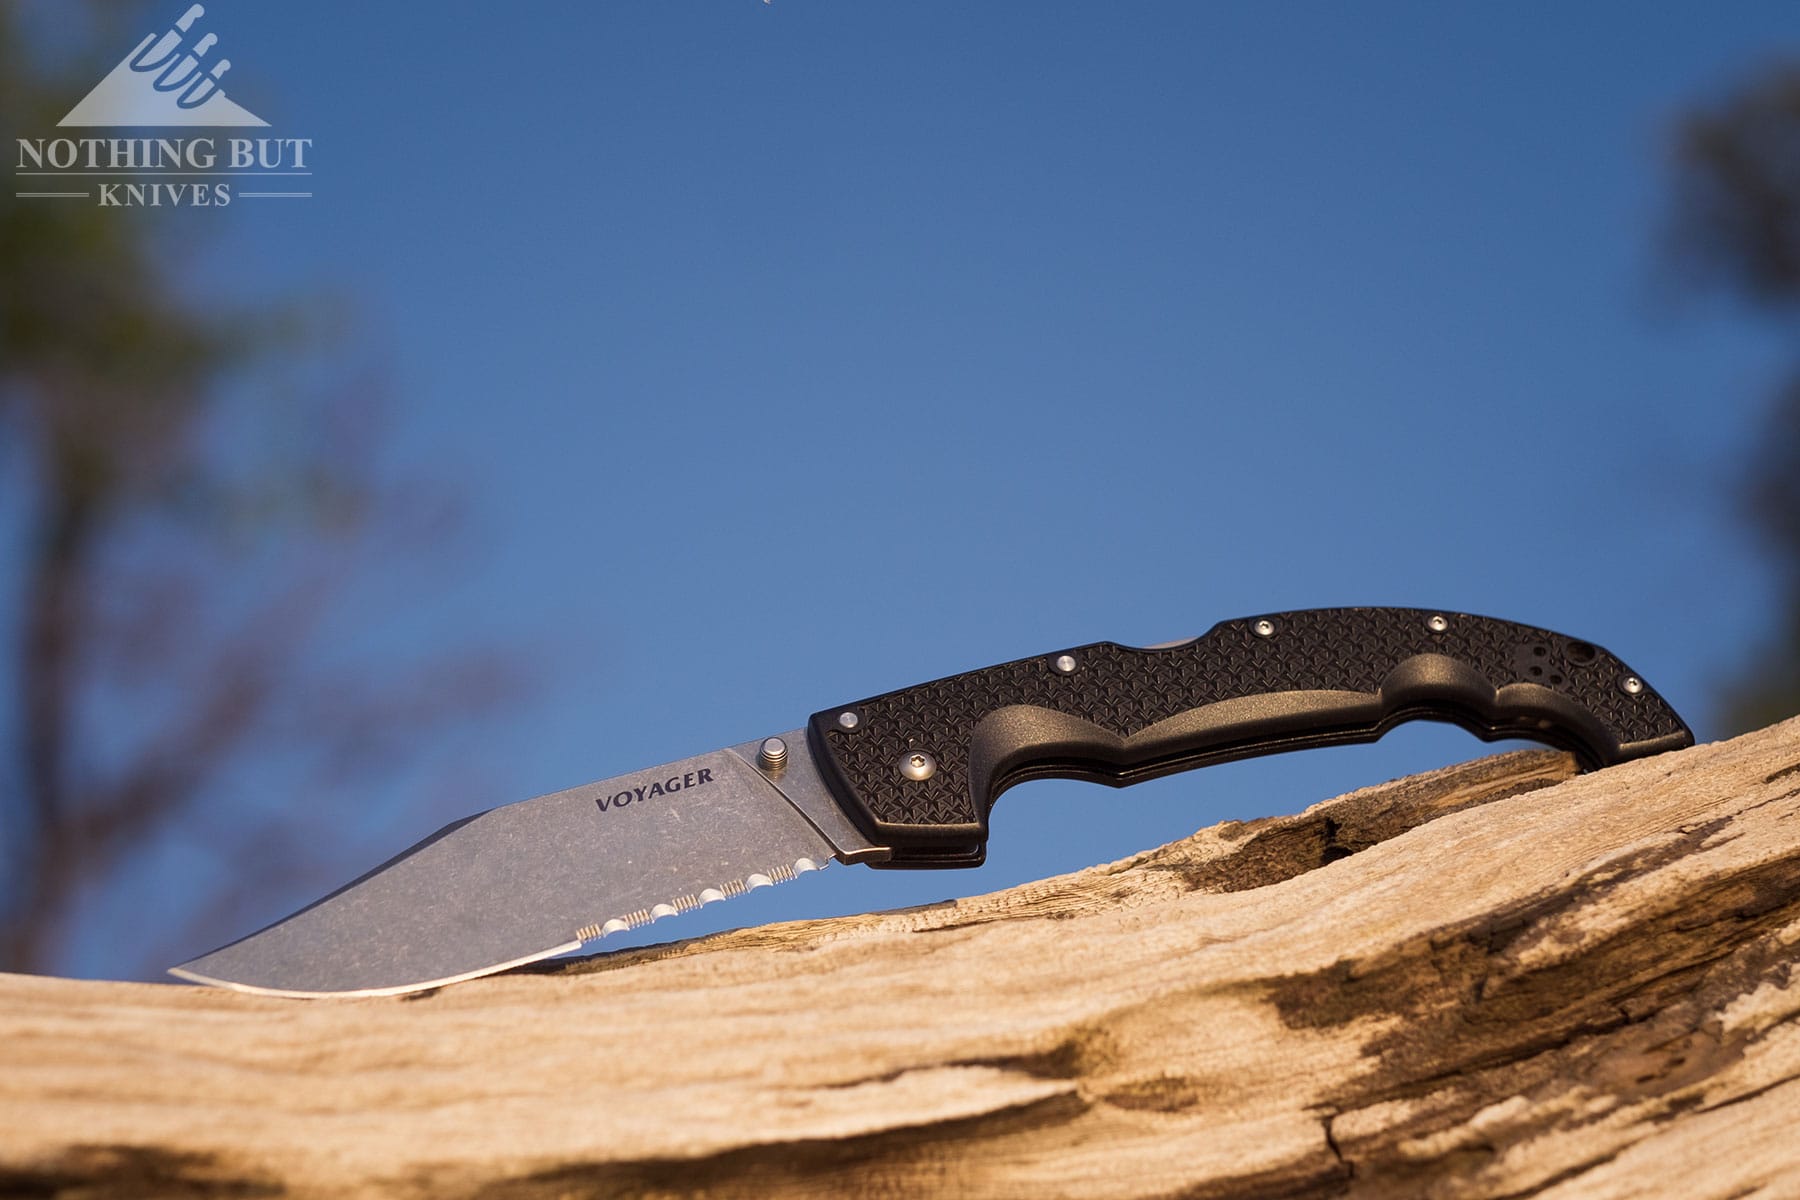 The Cold Steel Voyager XL folding knife in the open position tilted in a way that shows the blade edge.